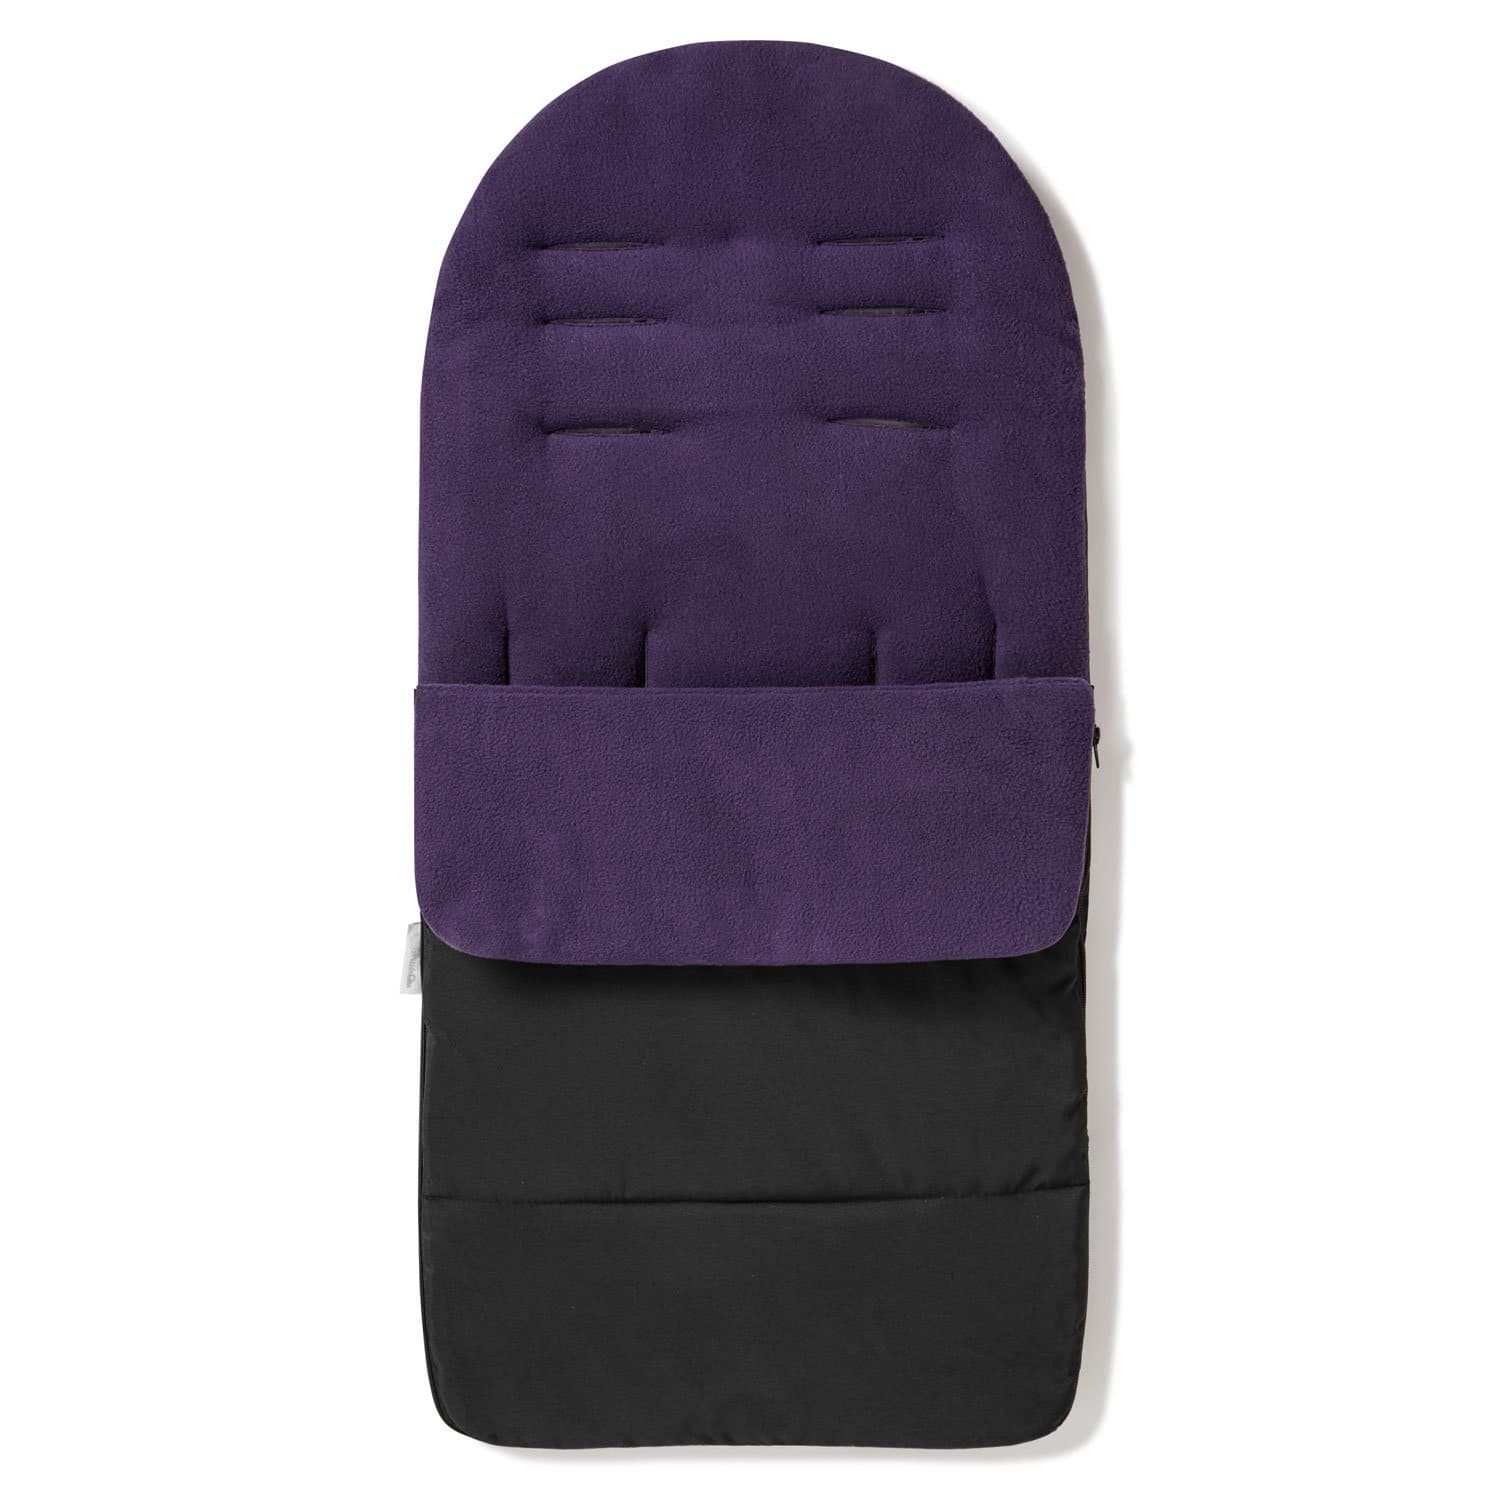 Premium Footmuff / Cosy Toes Compatible with BOB - For Your Little One